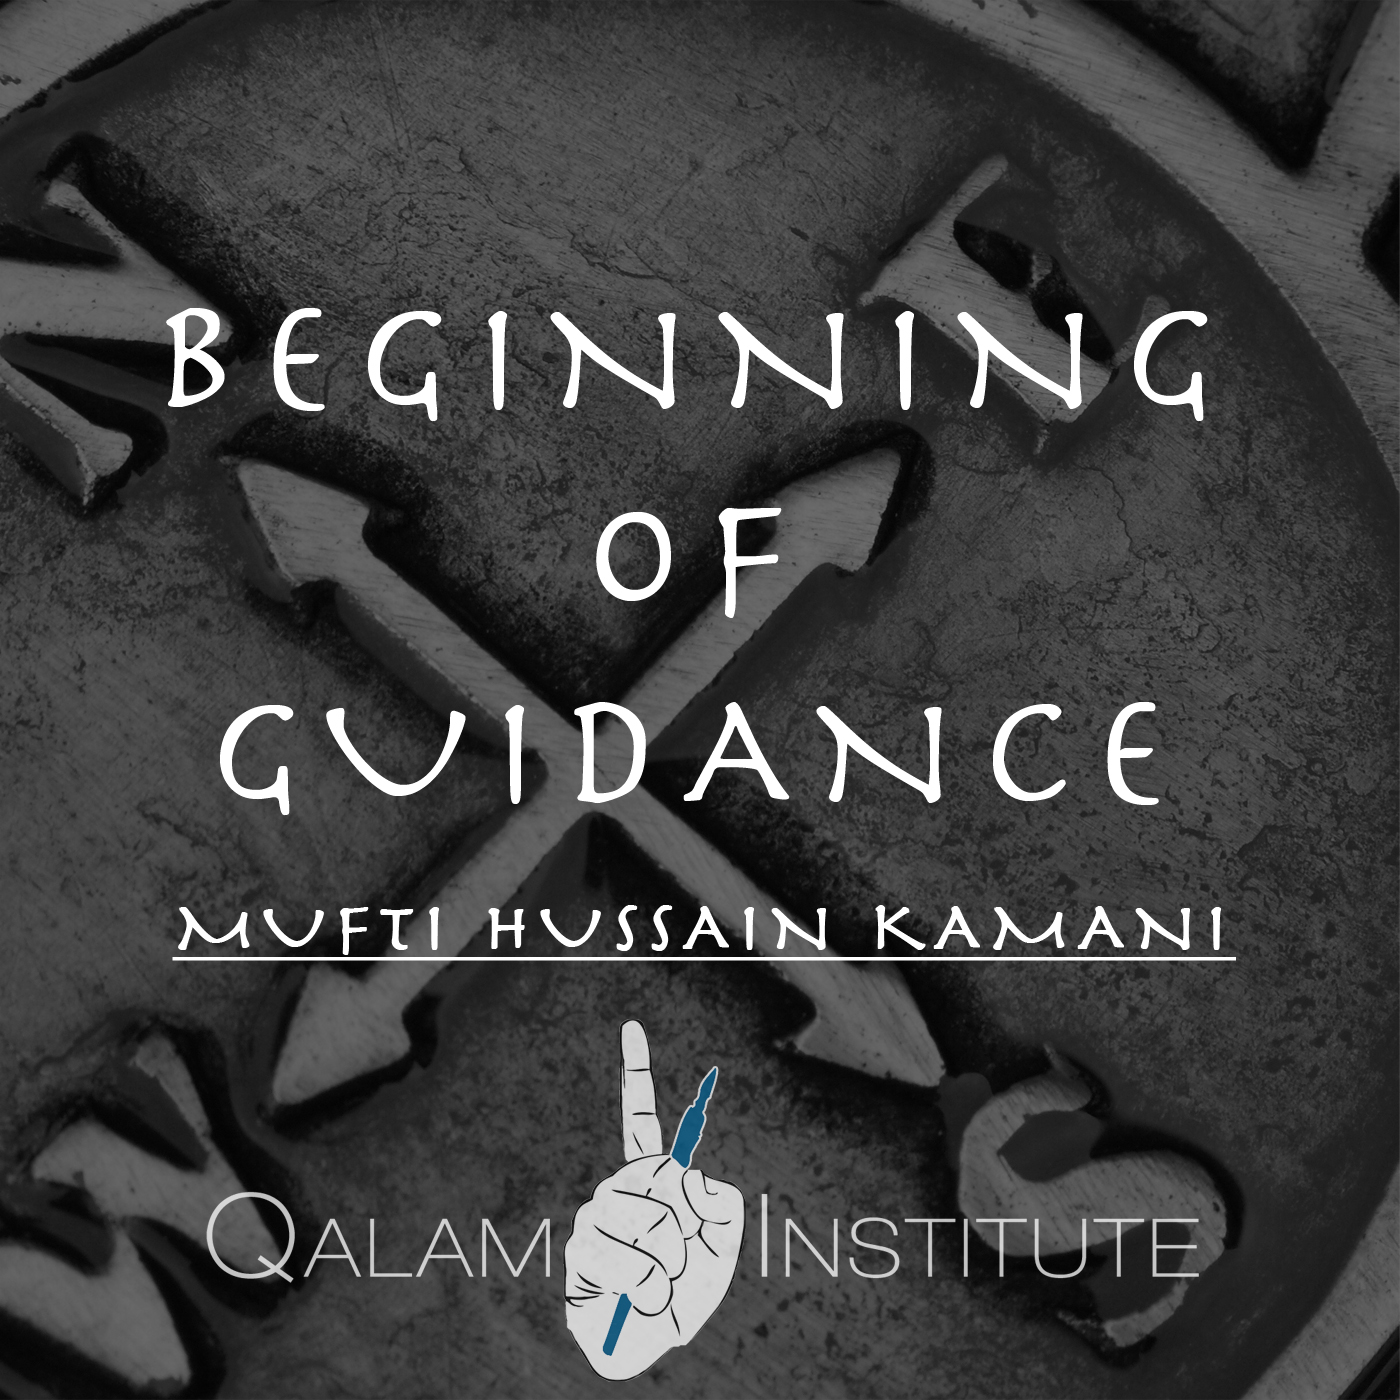 Beginning of Guidance: EP22 – The Sins of The Heart: Conclusion